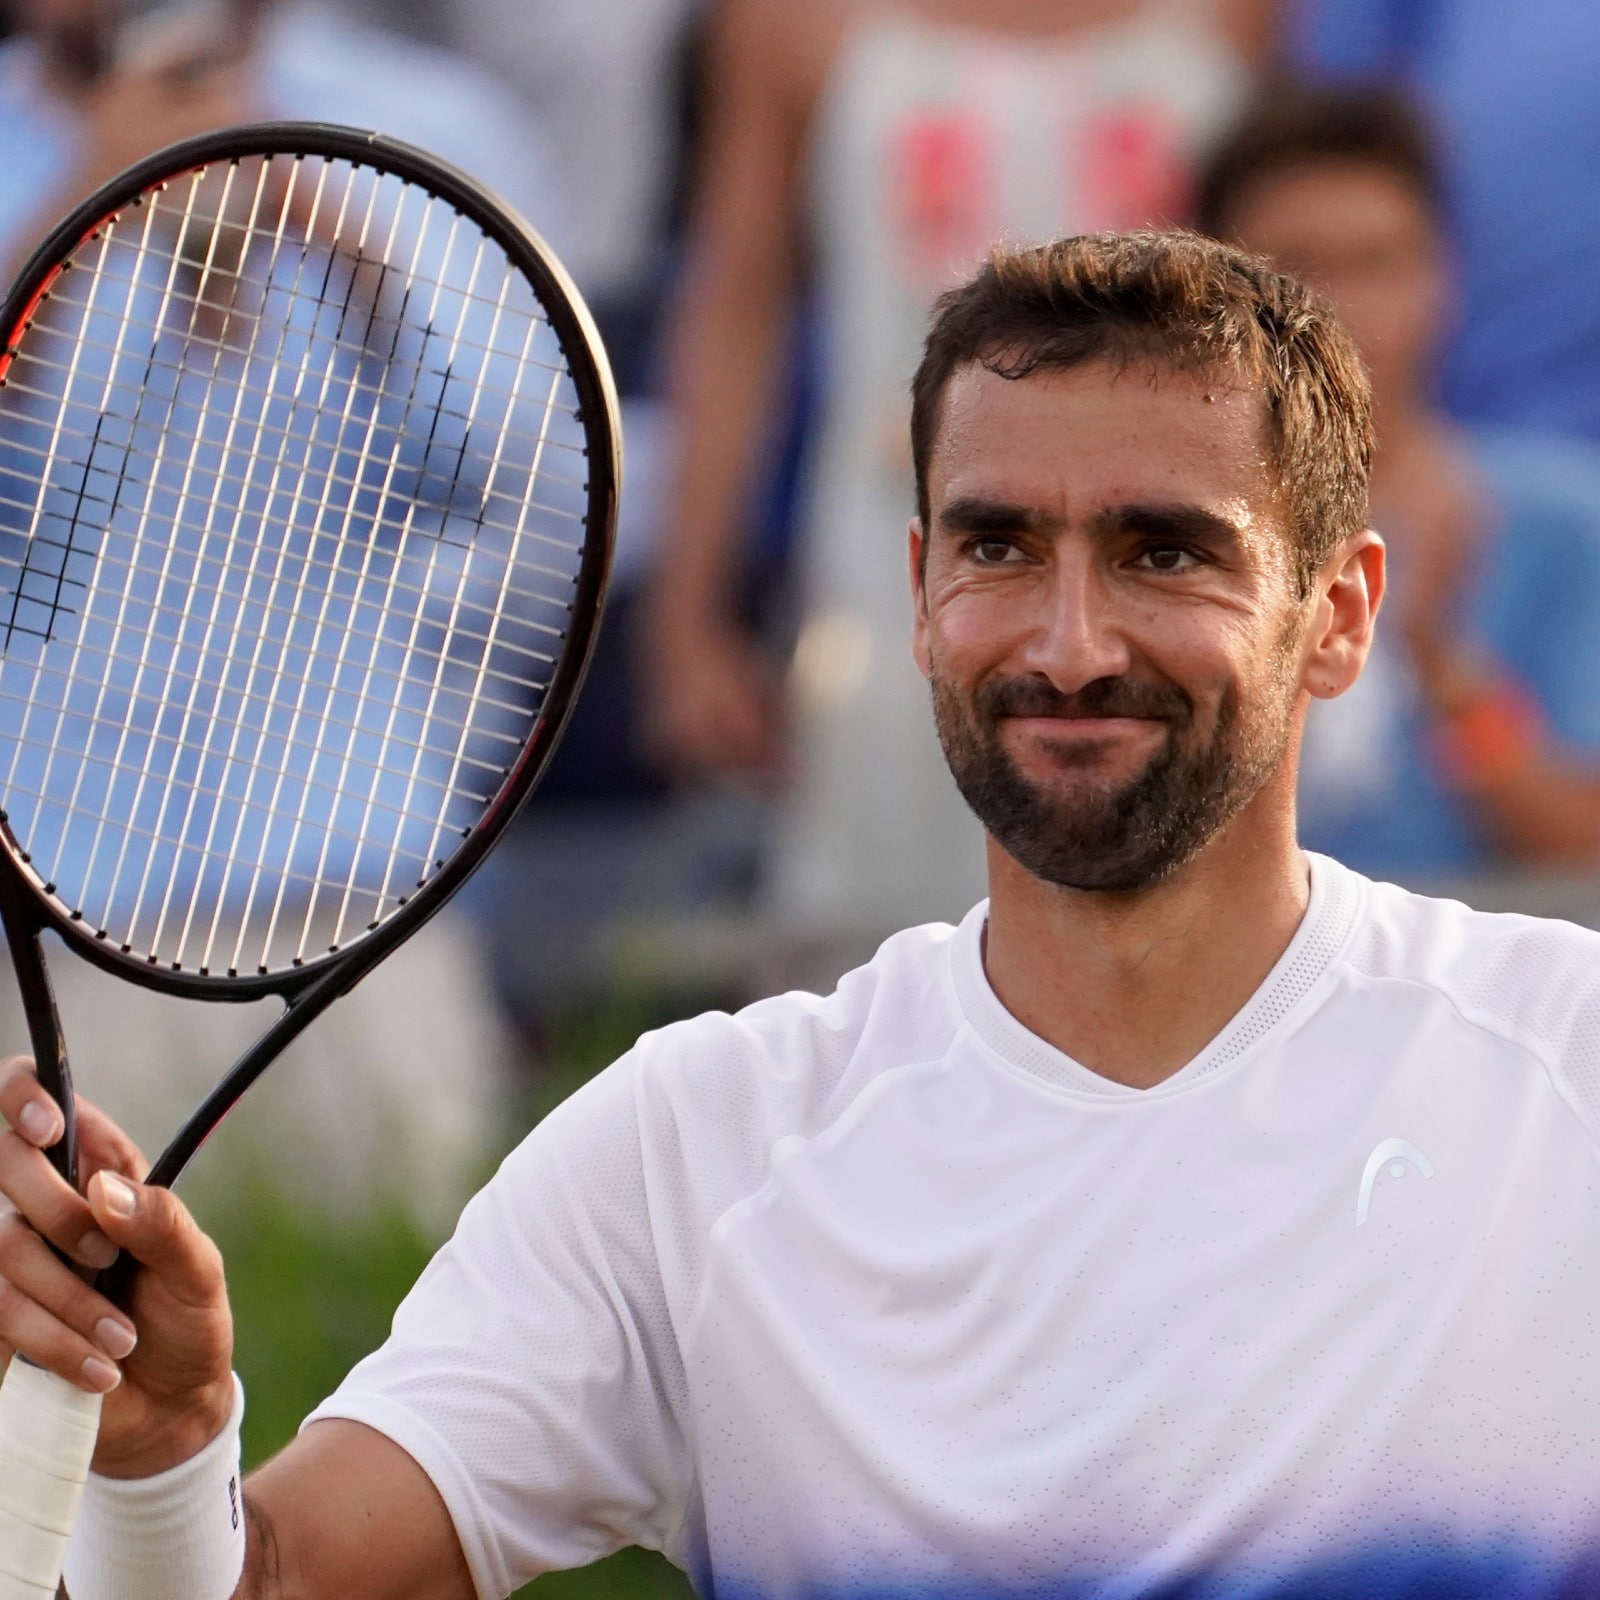 Wimbledon 2022 Marin Cilic Pulls Out After Testing Positive for COVID-19